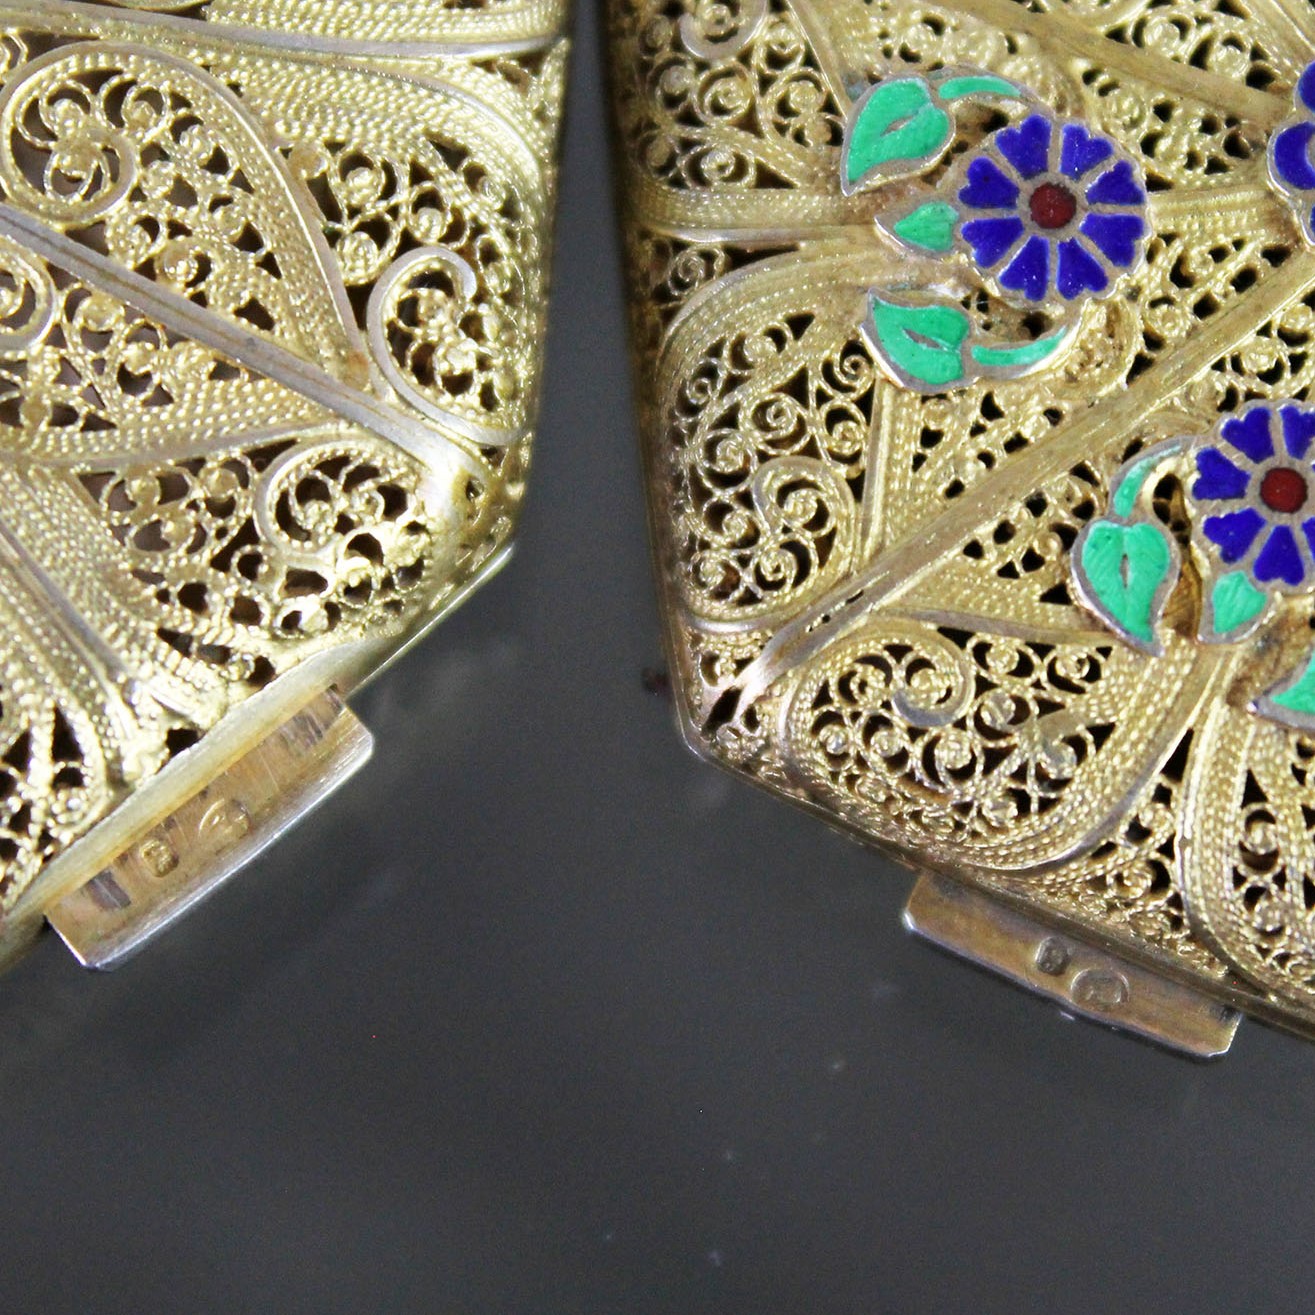 Pair Vintage Octagon Compacts Vermeil Filigree Hallmarked with Enameled Flower Applique